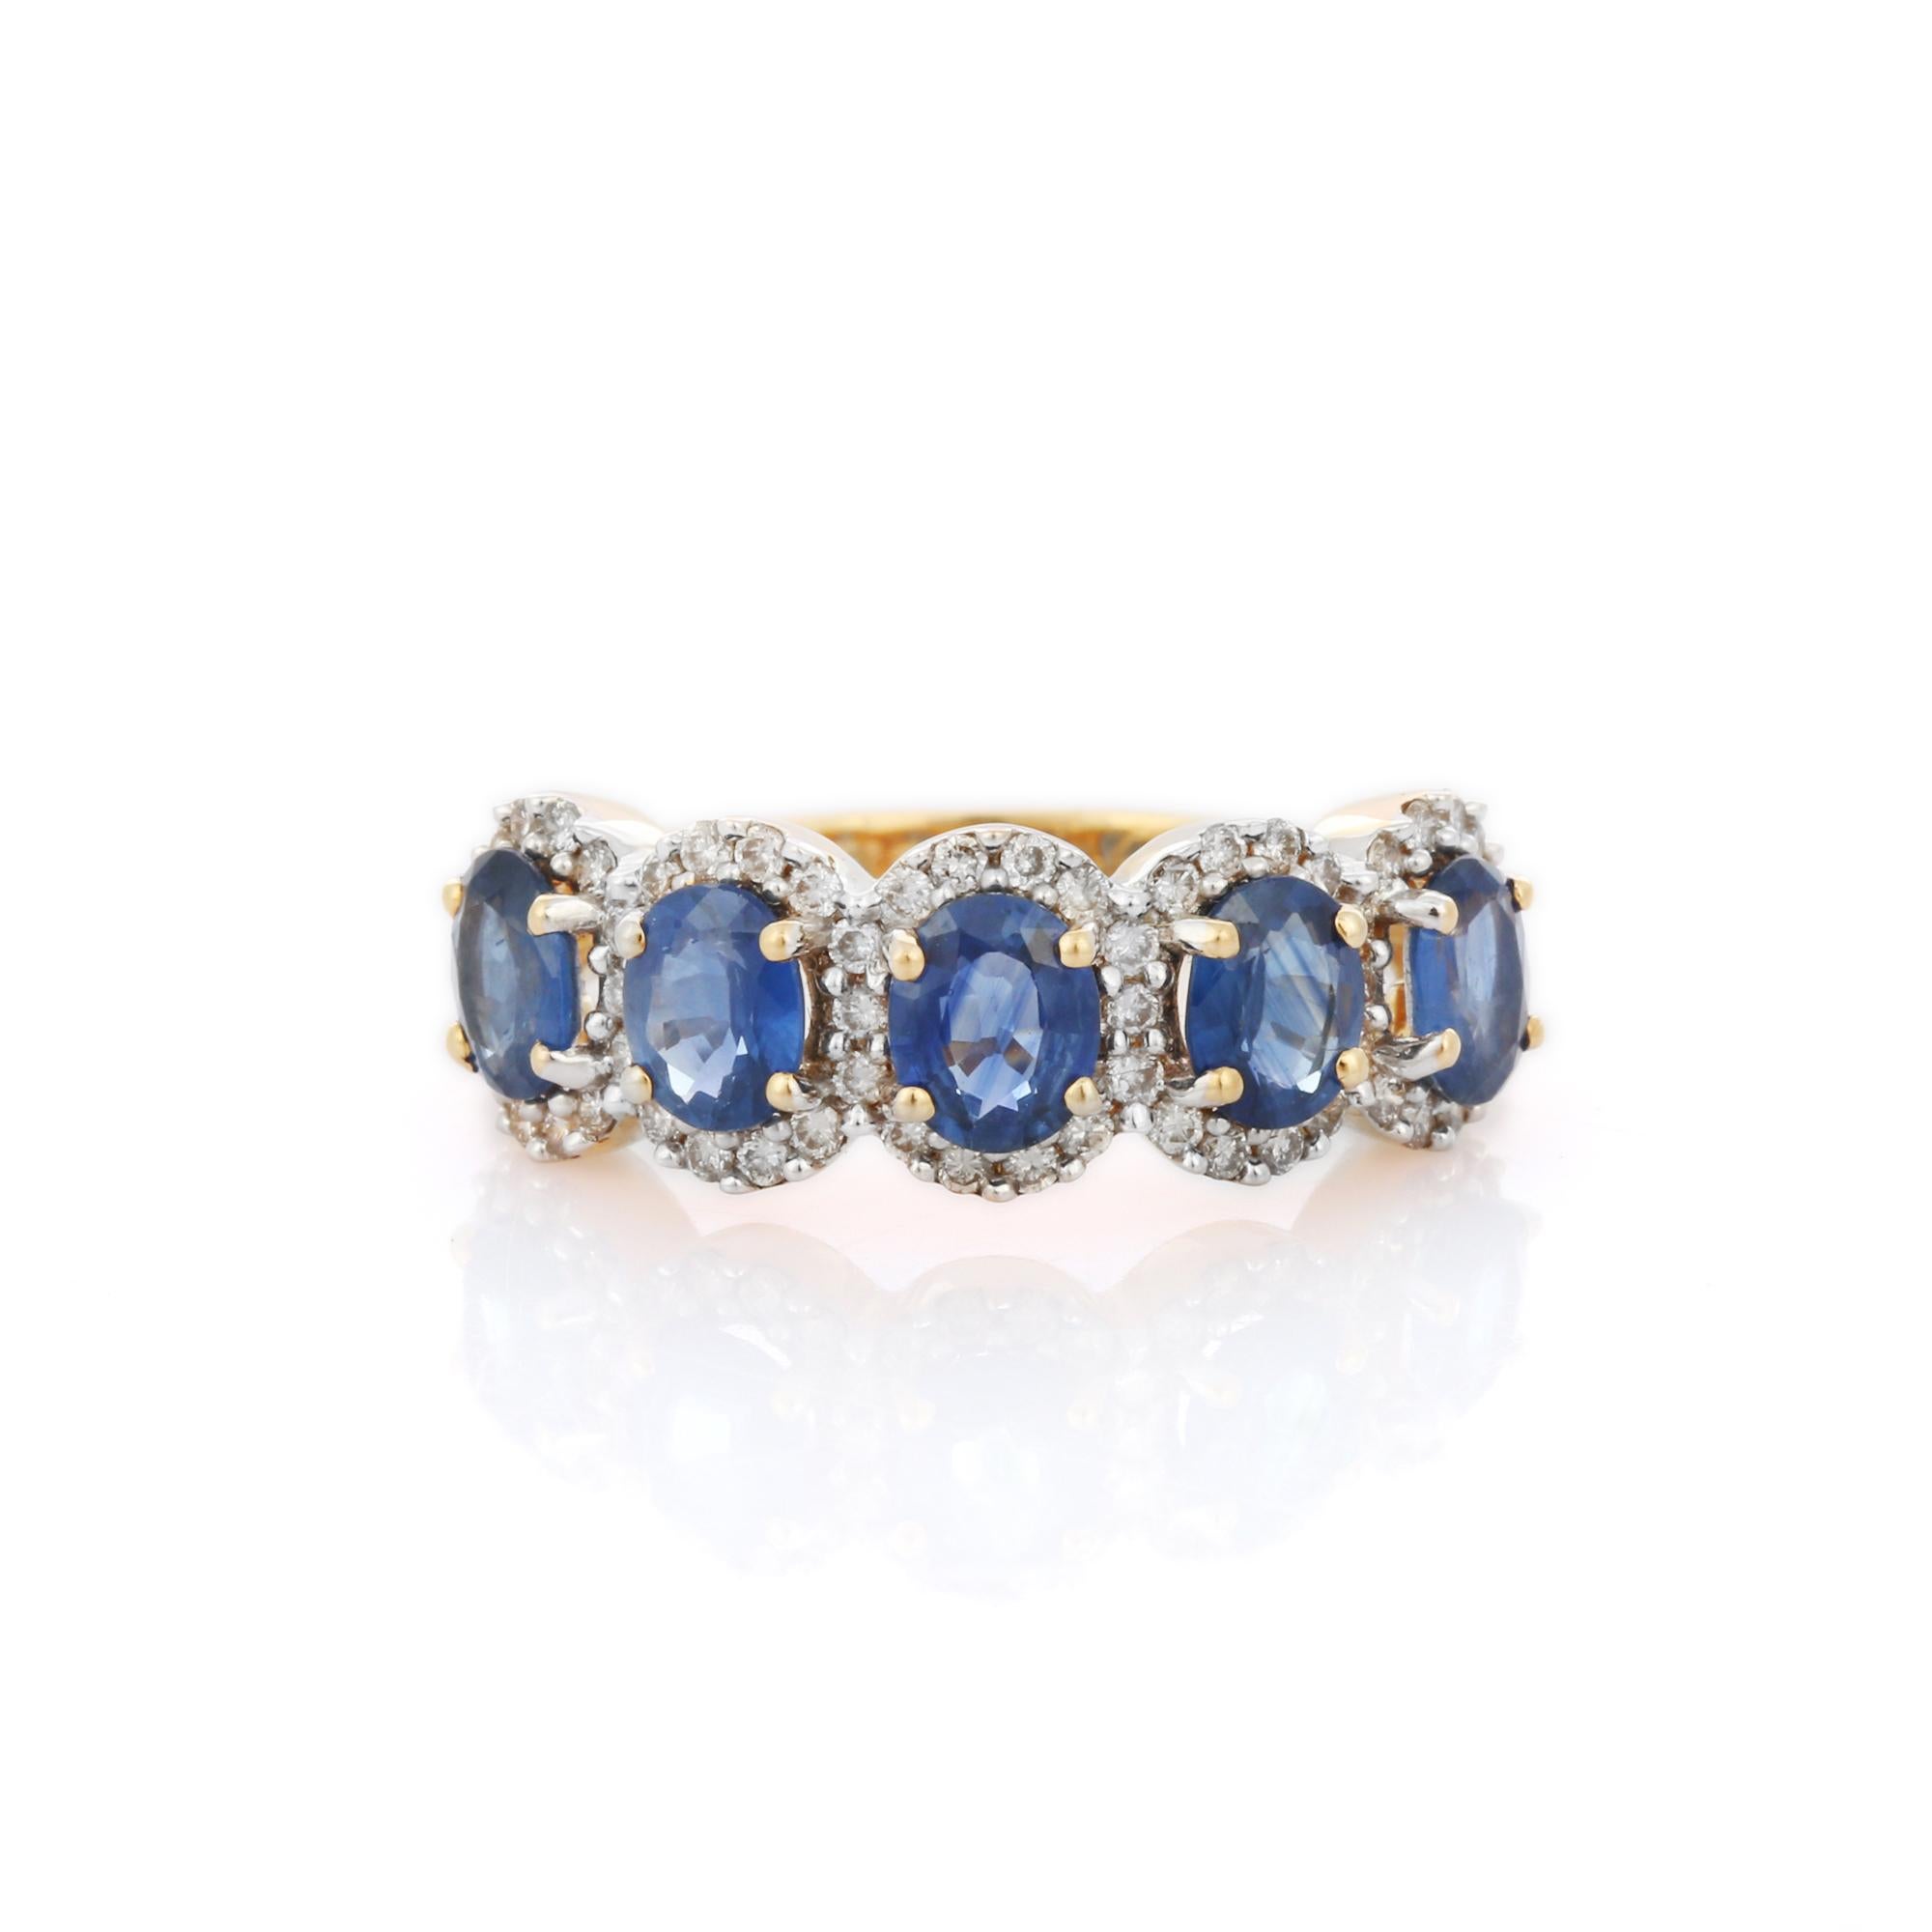 For Sale:  18K Yellow Gold Half Engagement Band with Sapphires Amidst in Diamonds 5